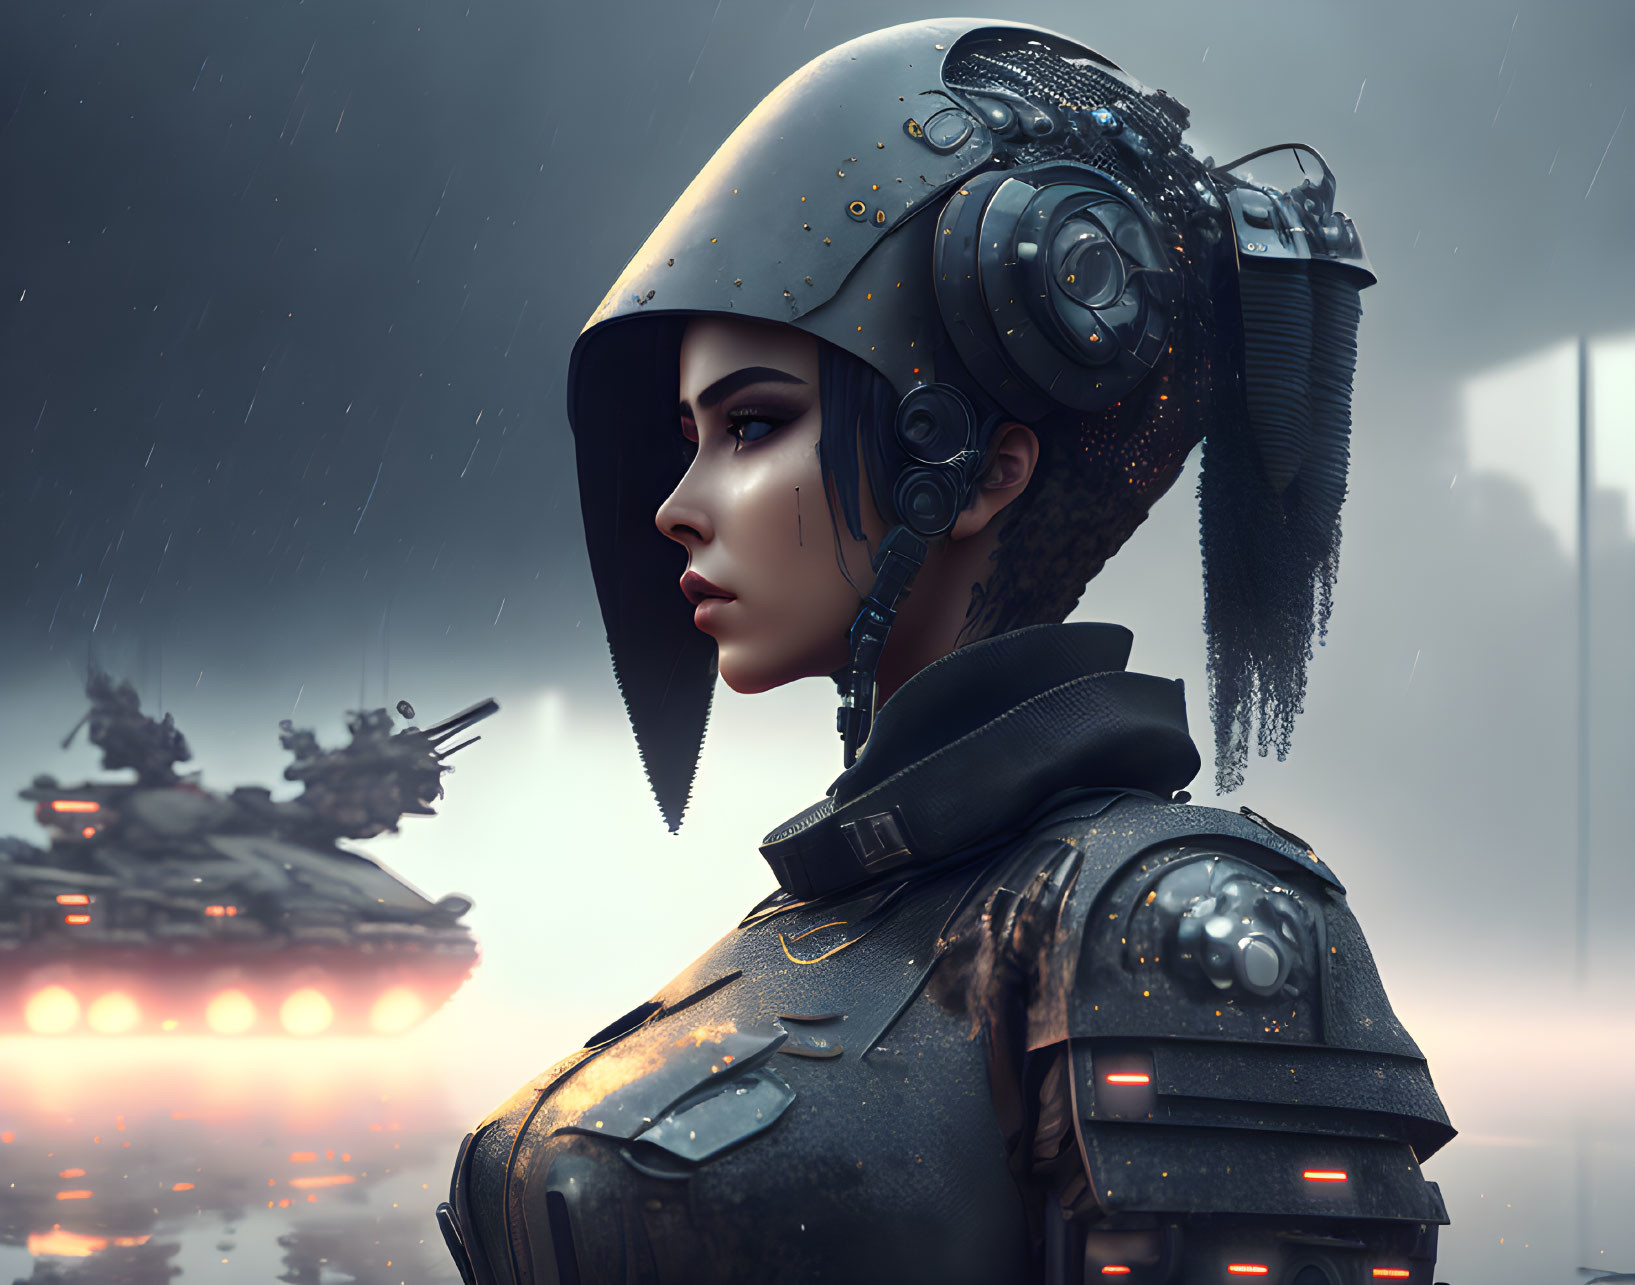 Futuristic female soldier in high-tech armor standing in rain with hovercraft in background